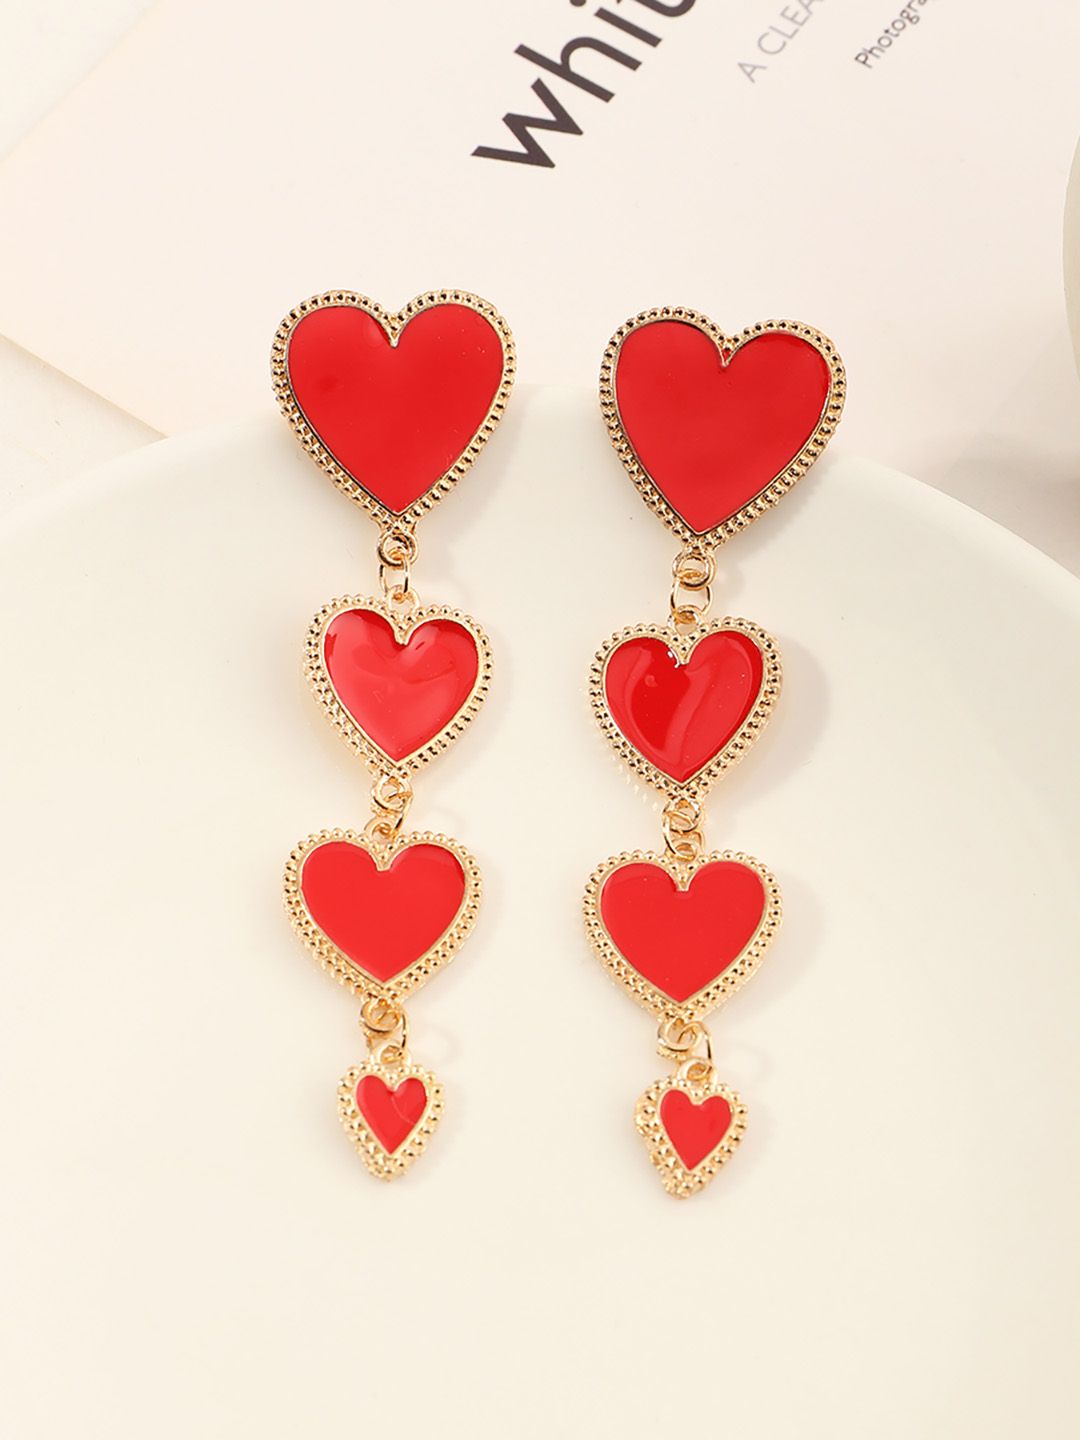 URBANIC Red & Gold-Toned Enamelled Heart Shaped Drop Earrings Price in India